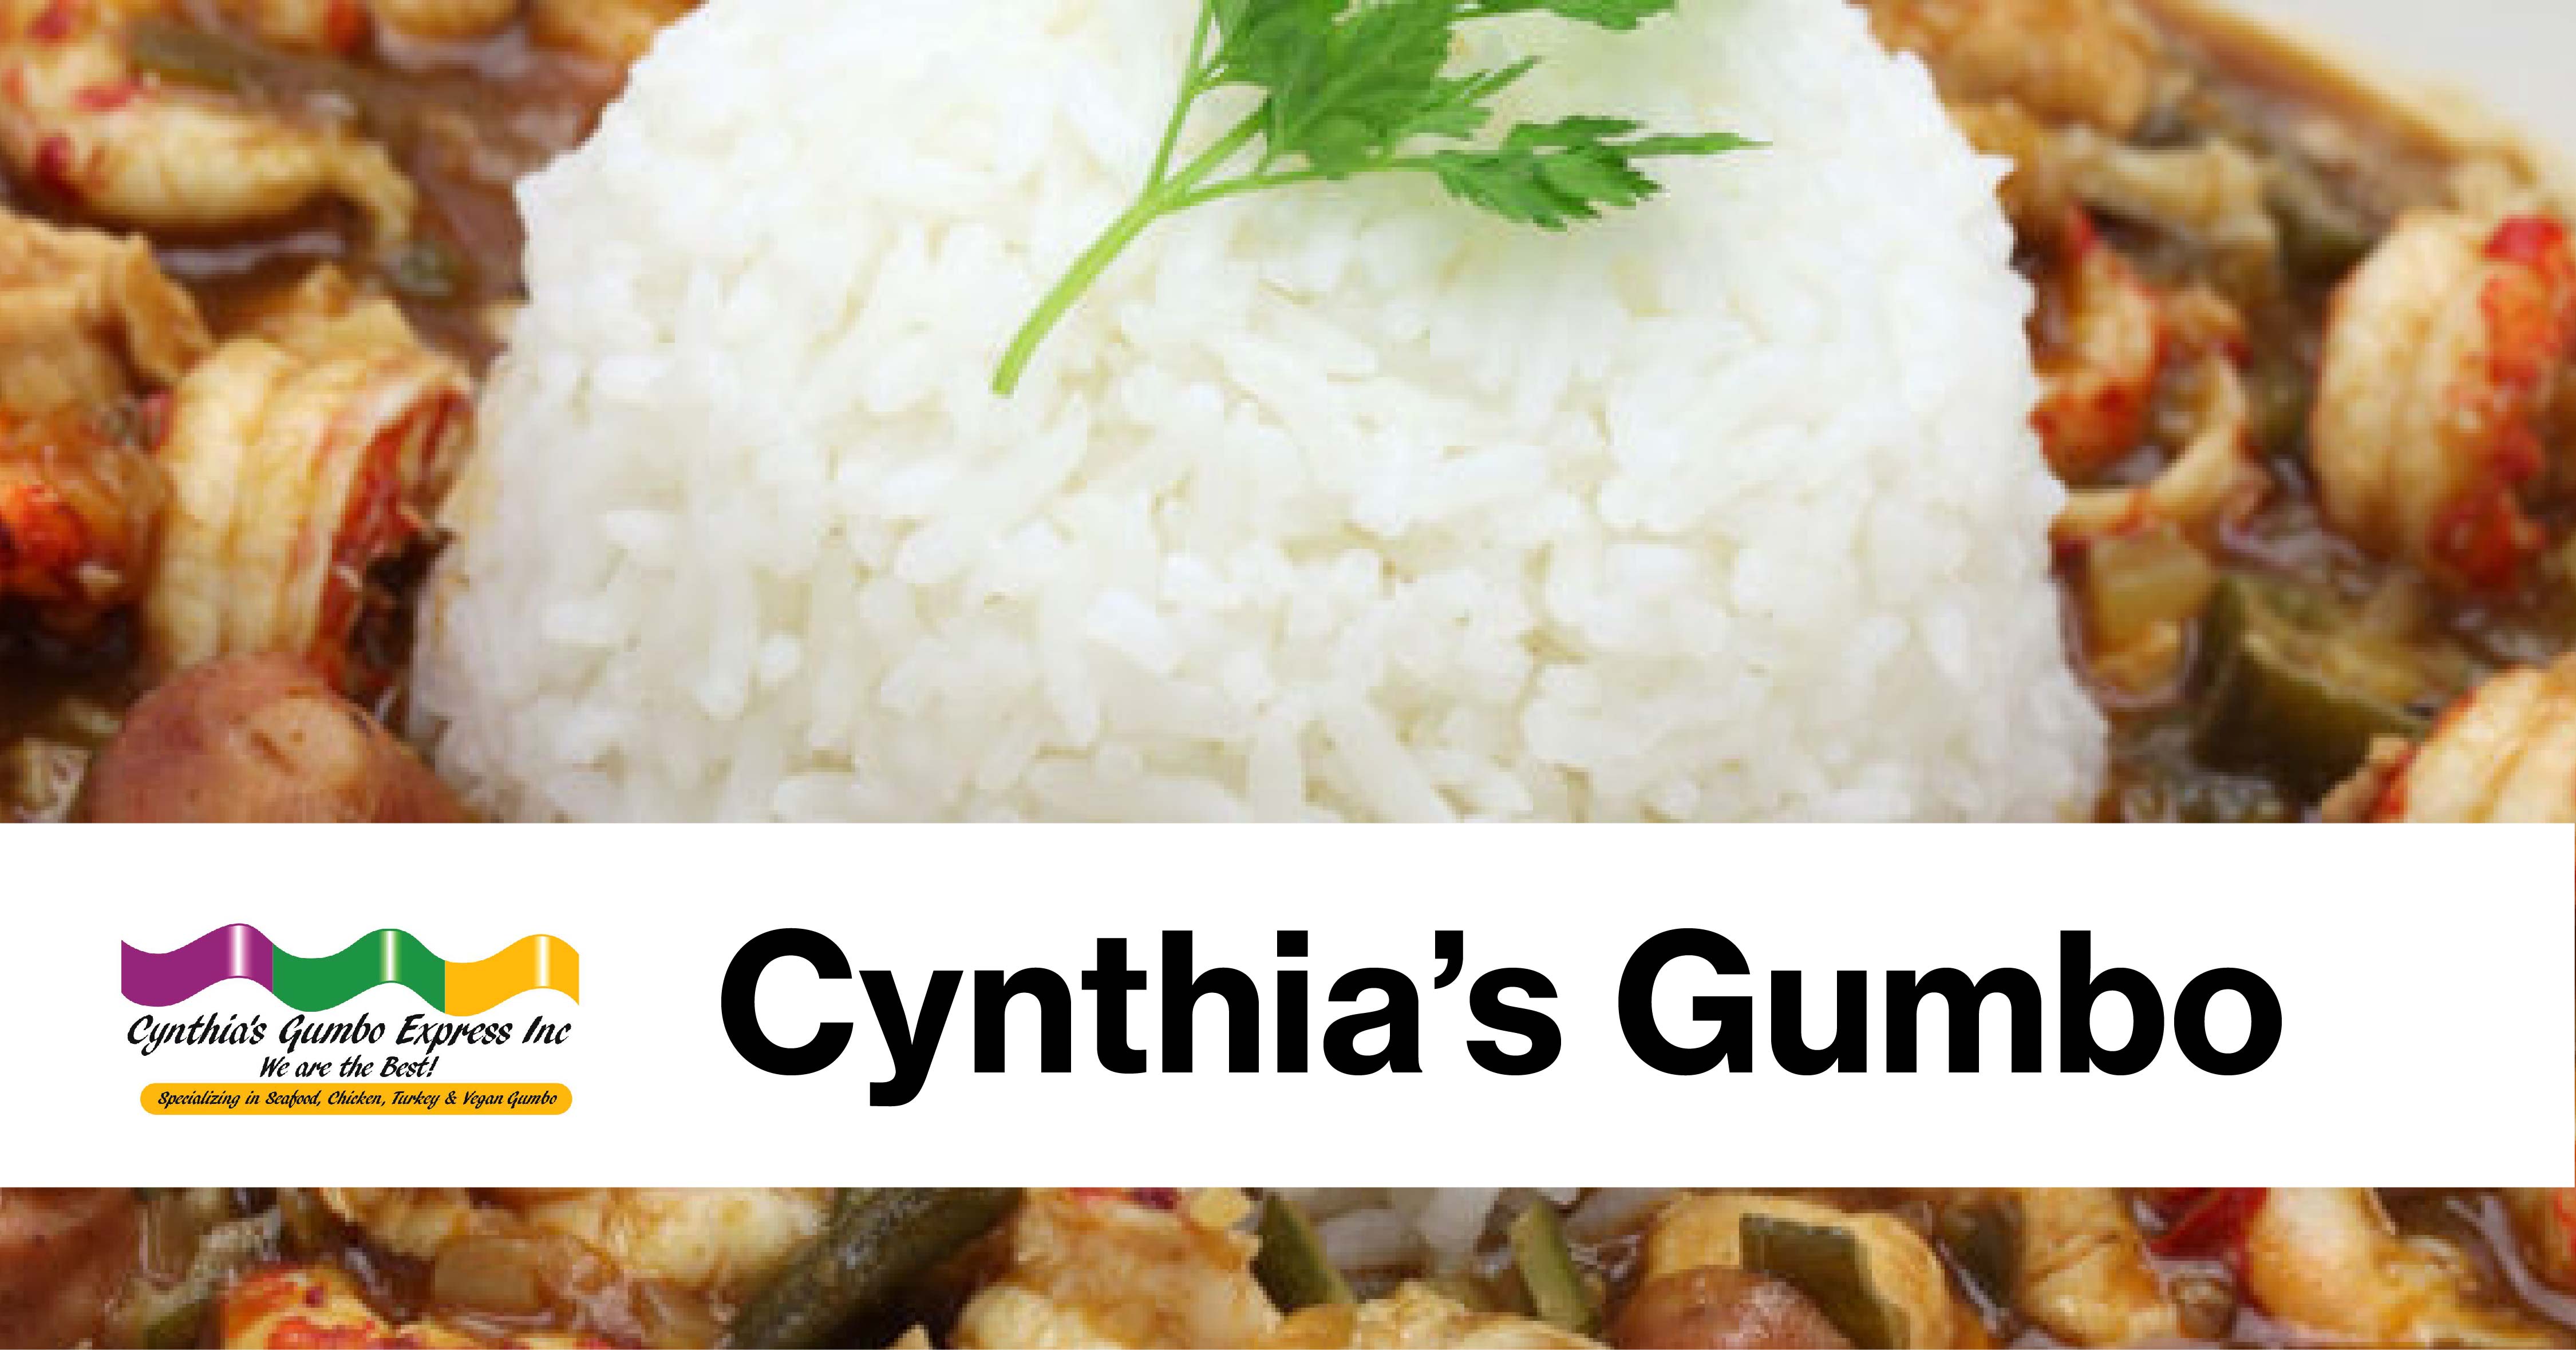 Close up of rice and gumbo with "Cynthia's Gumbo" and logo